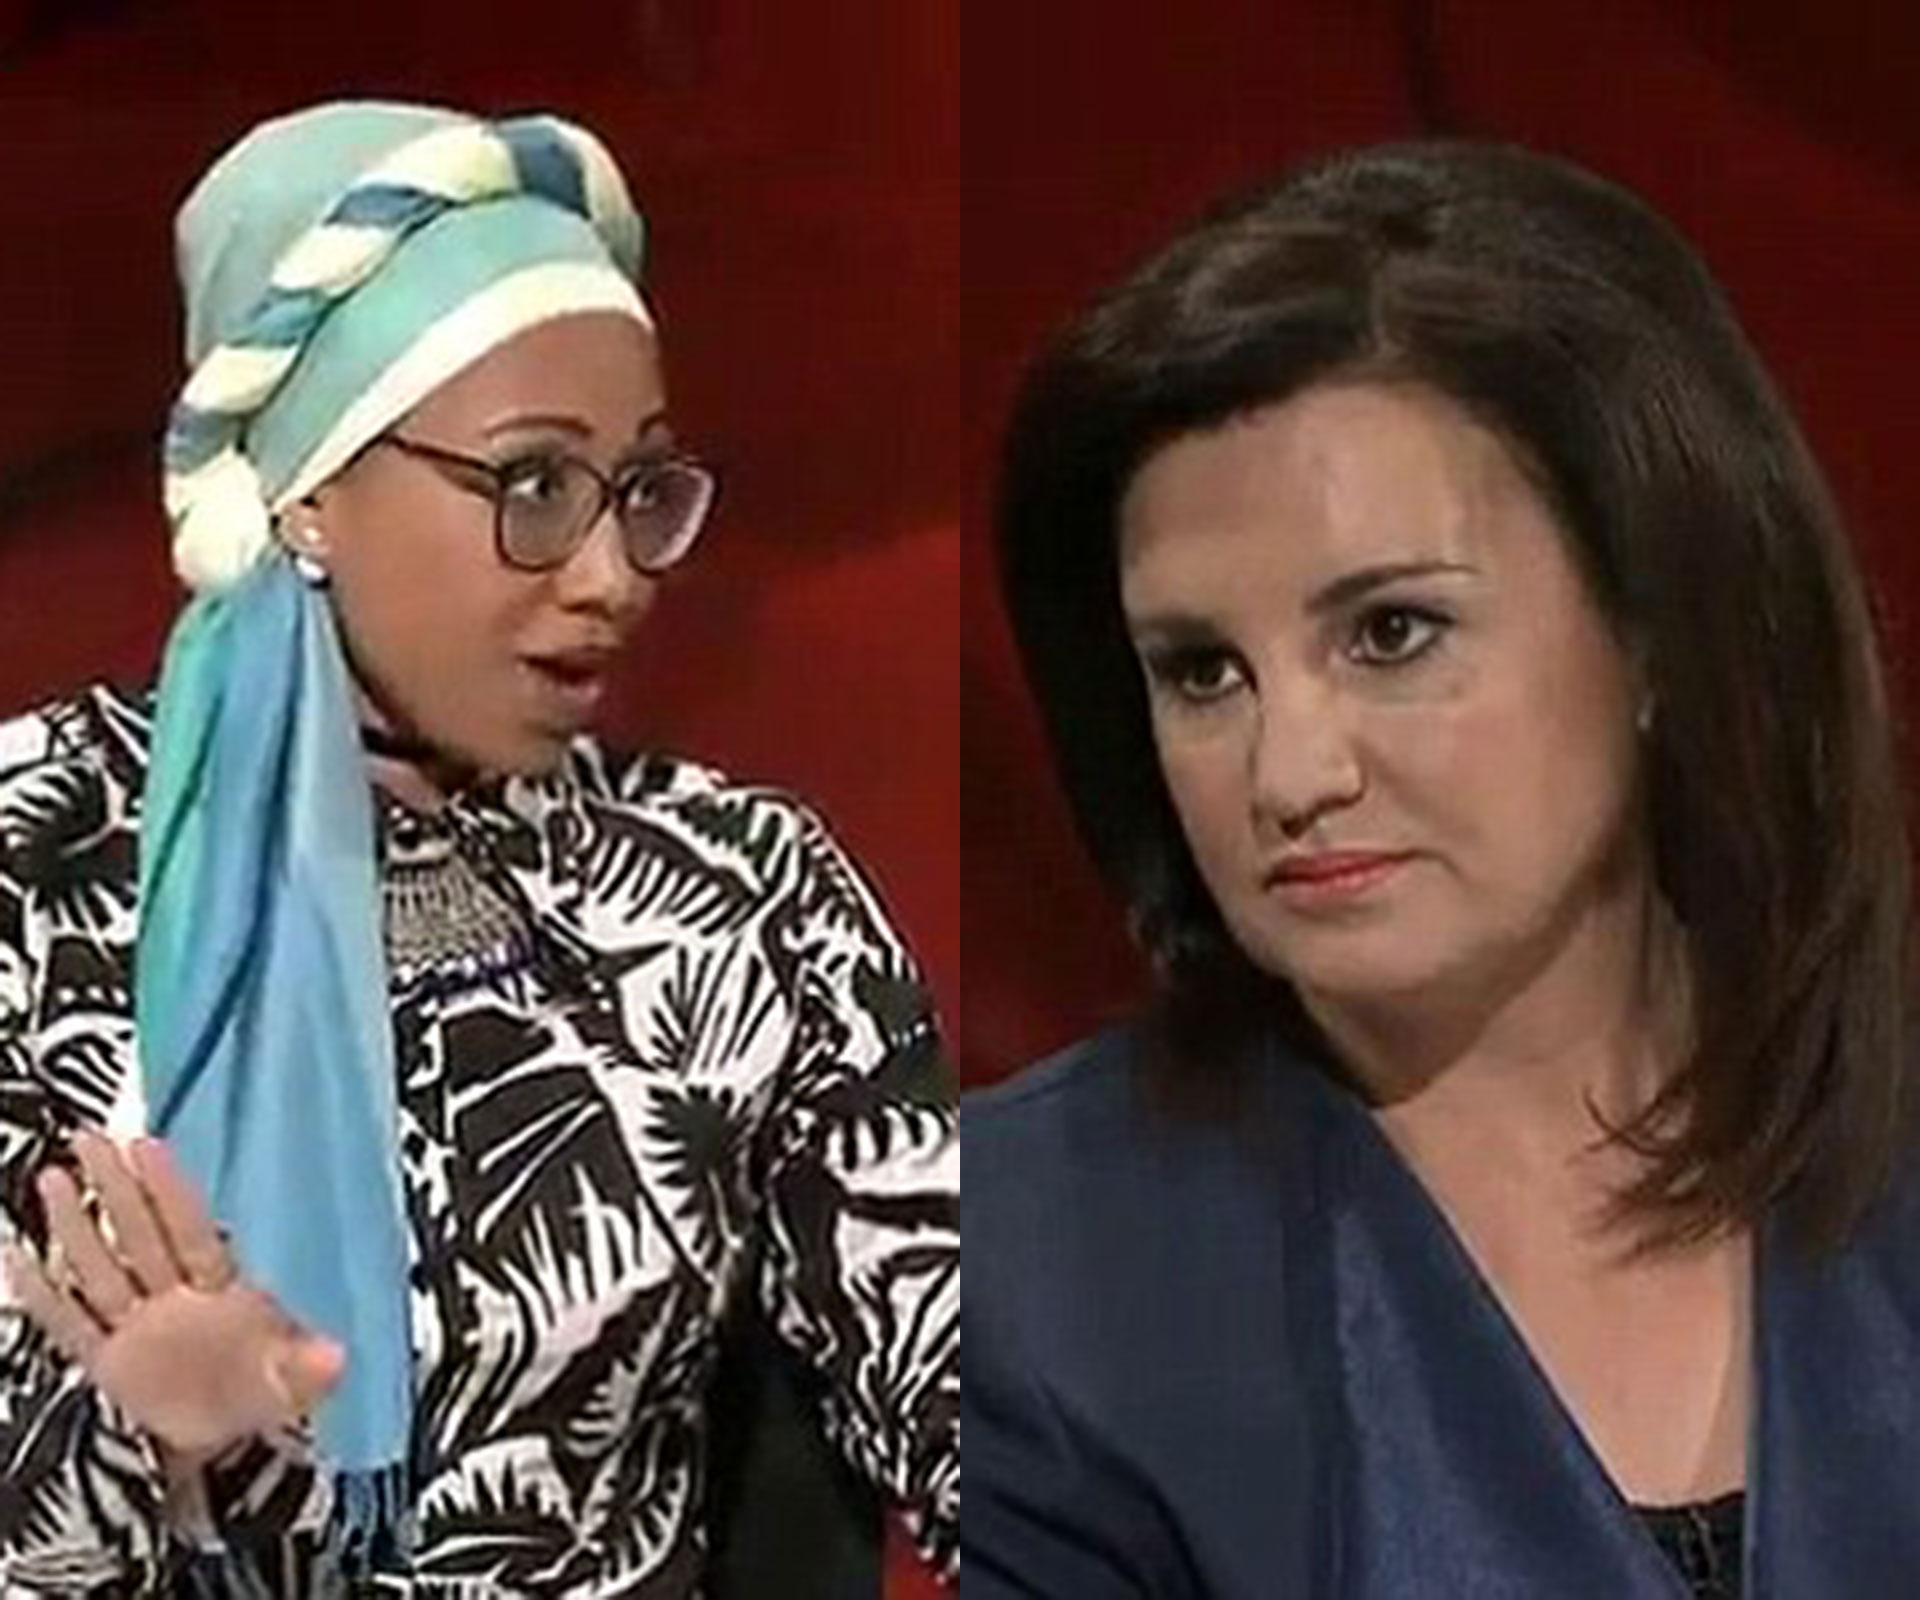 Jacqui Lambie has Q&A screaming match with Muslim youth leader over views on Muslim ban